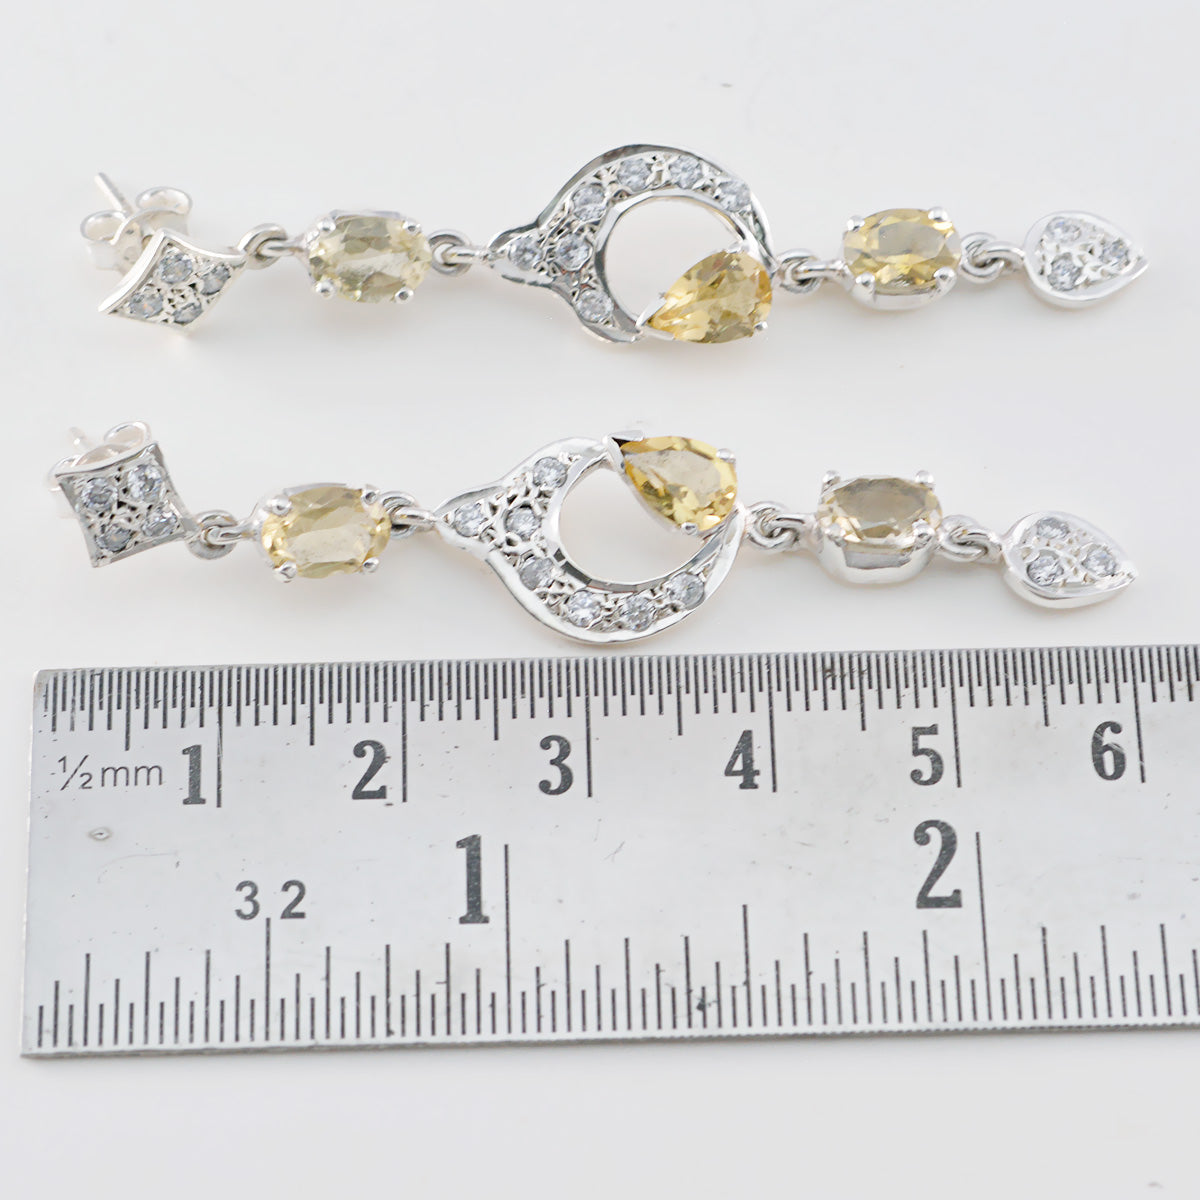 Riyo Good Gemstones multi shape Faceted Yellow Citrine Silver Earrings boxing day gift